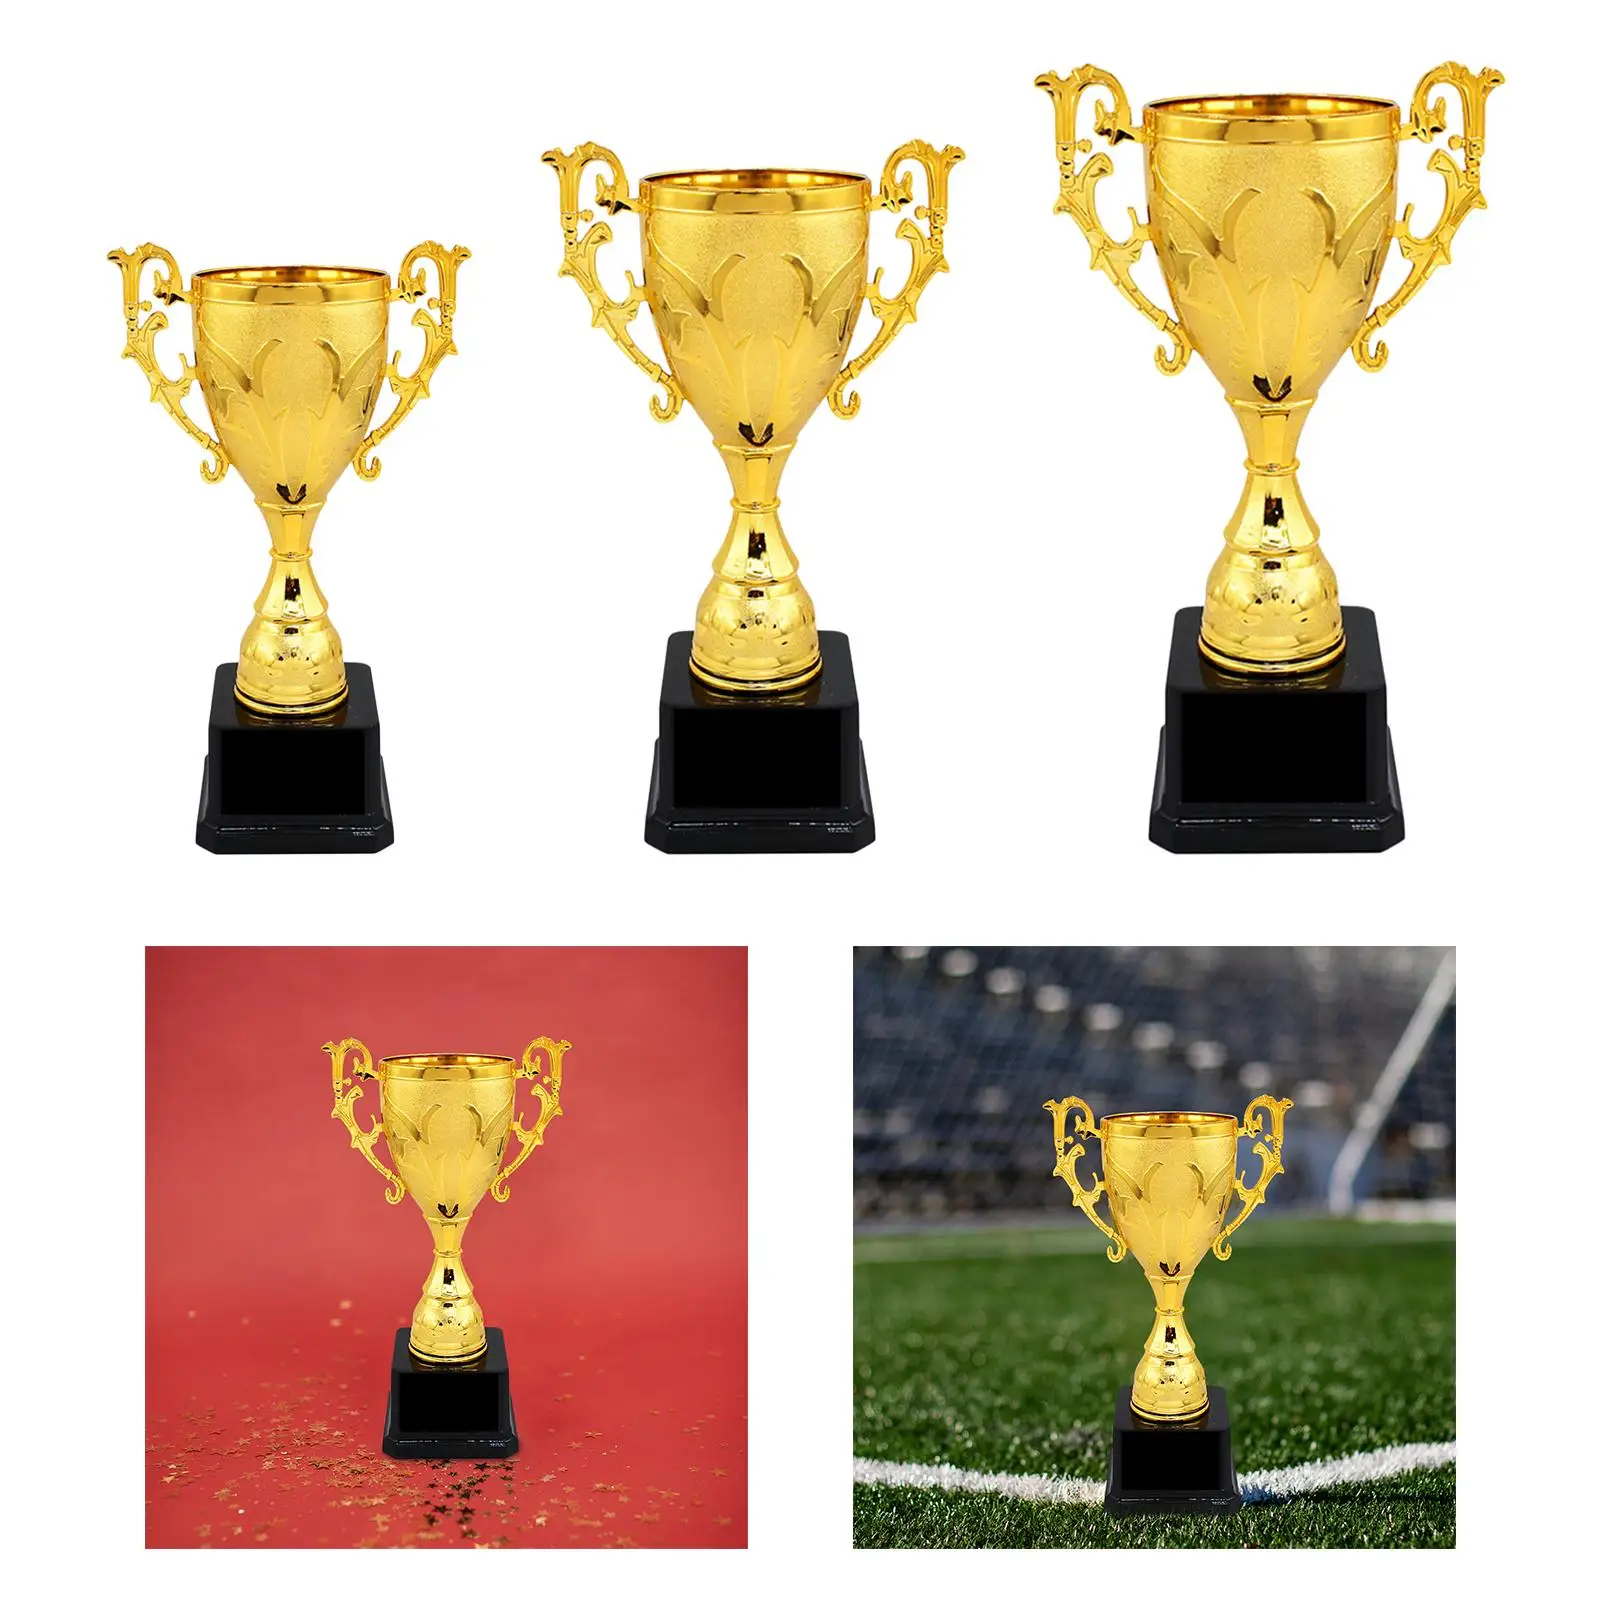 Award Trophy Kids Small Trophy Prize Trophy Cup Award for Party Favors Soccer Football League Match Celebrations Tournaments